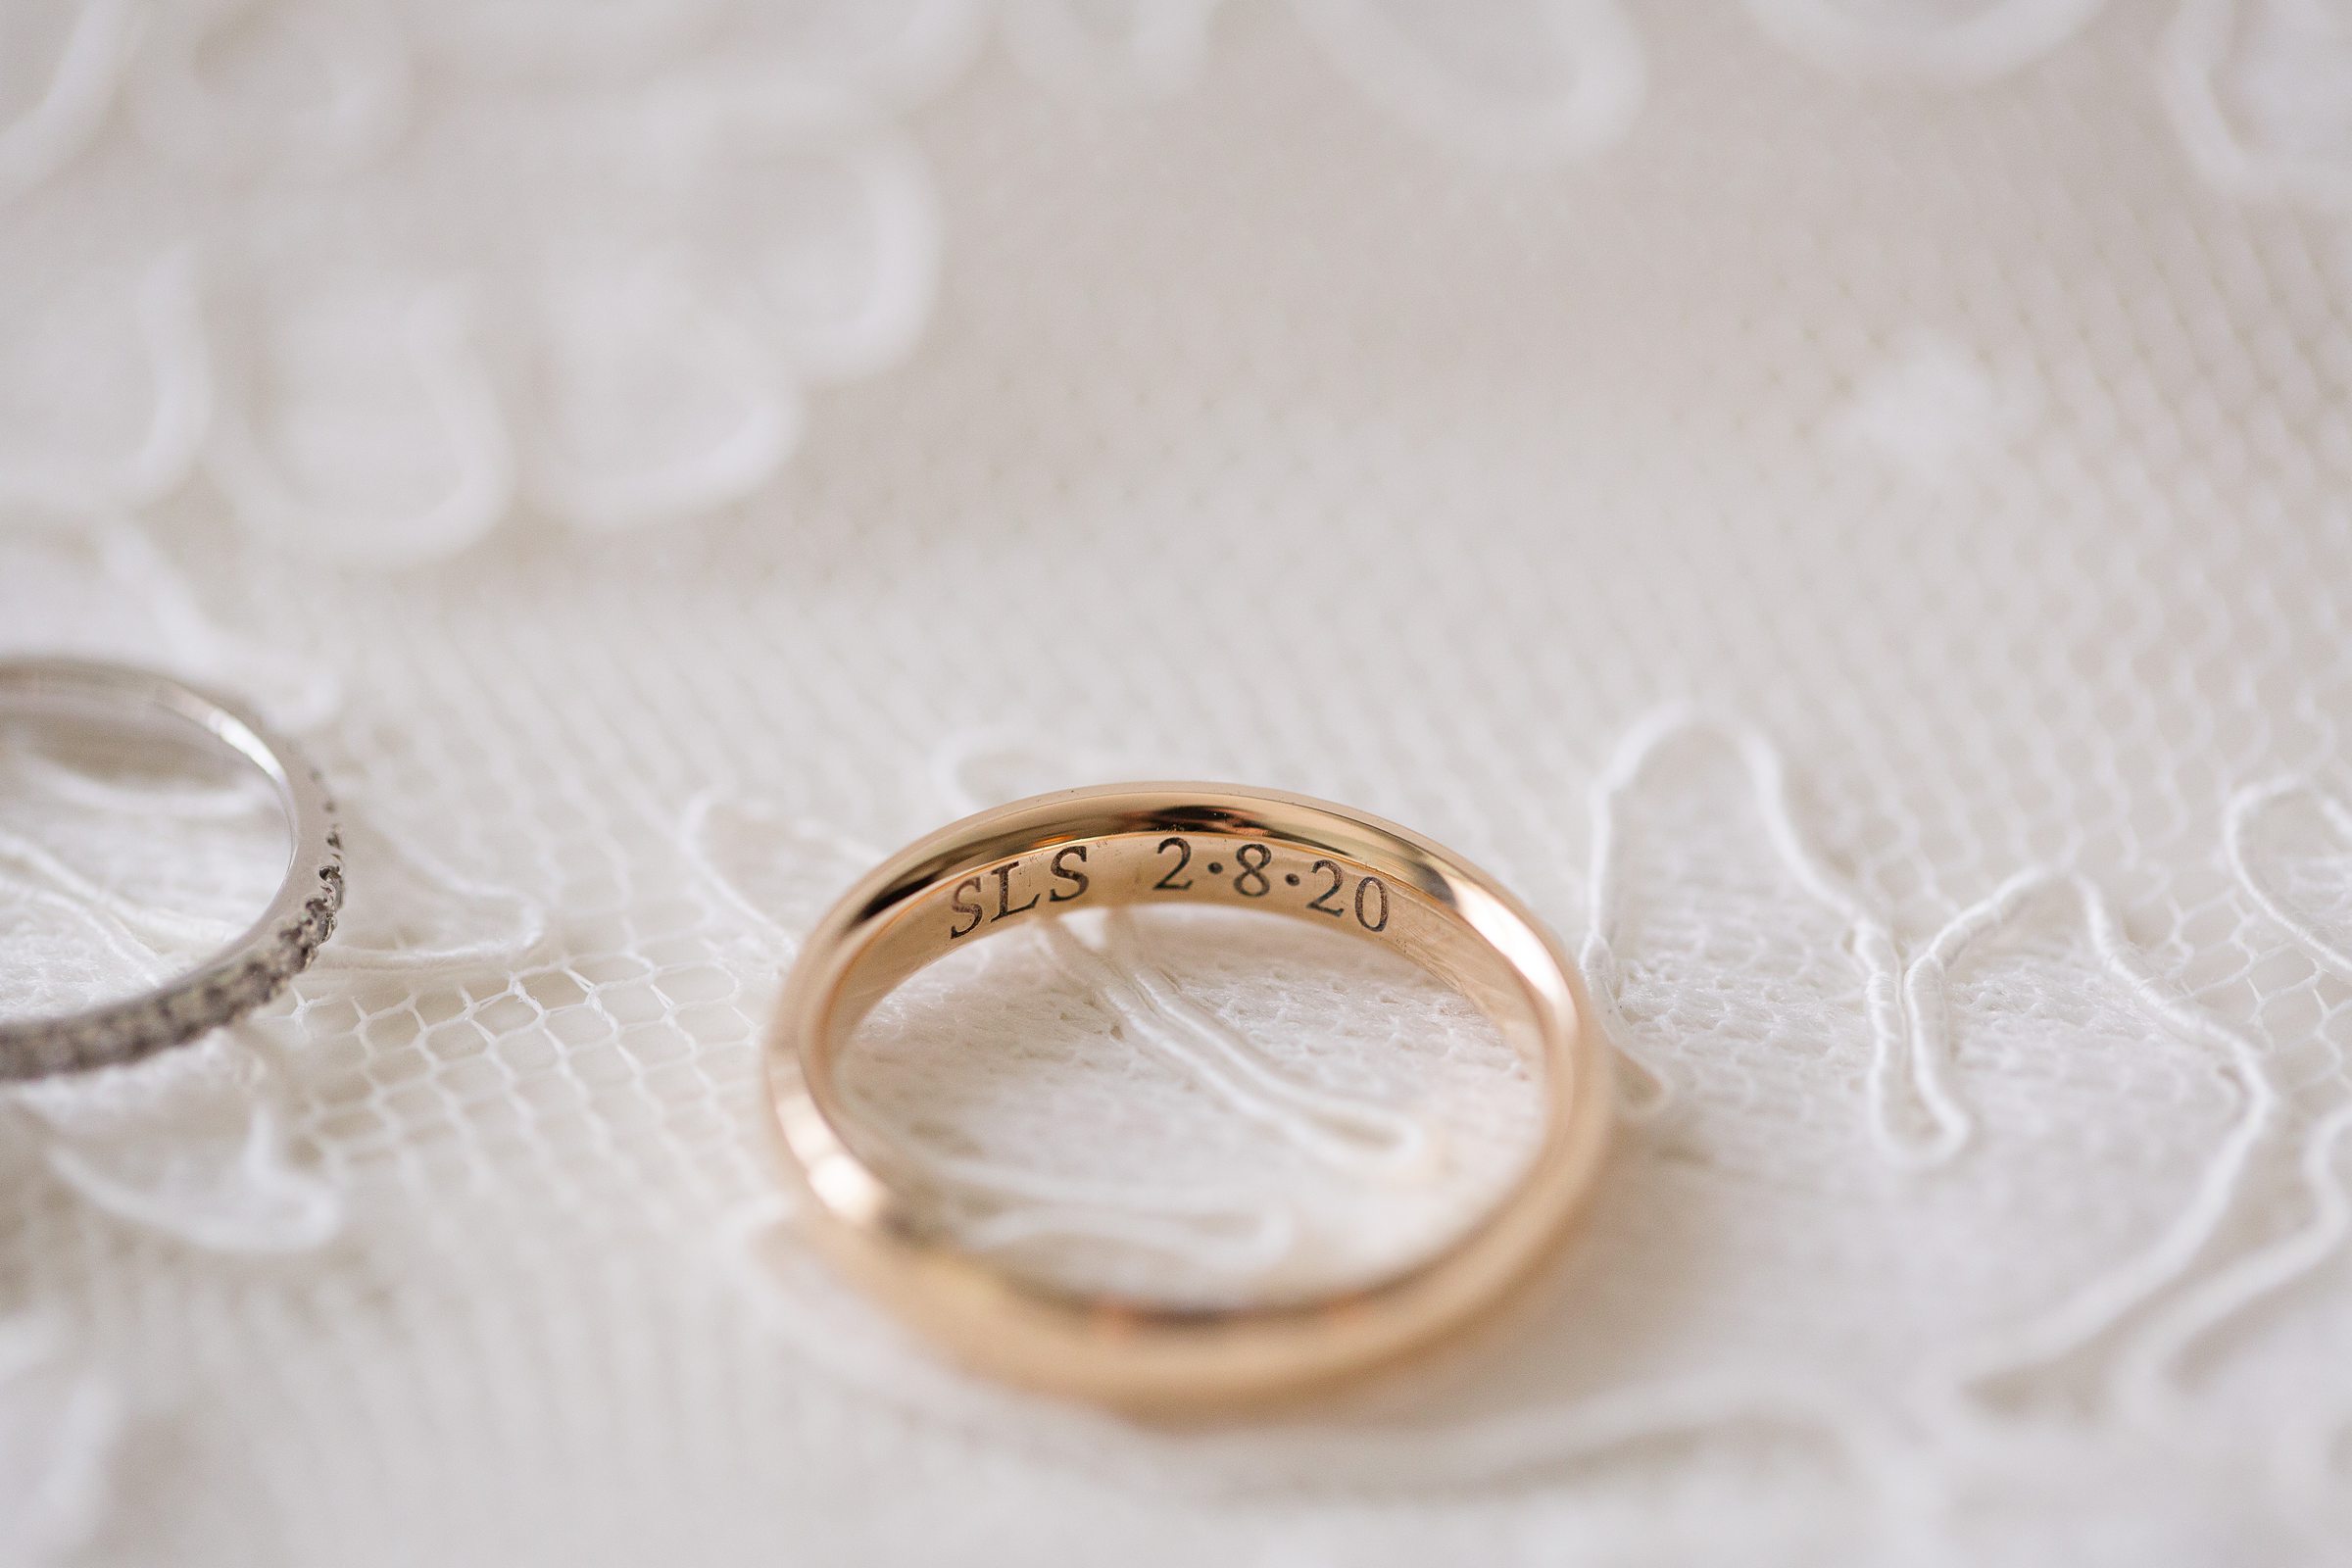 Close up photography of engraved wedding band